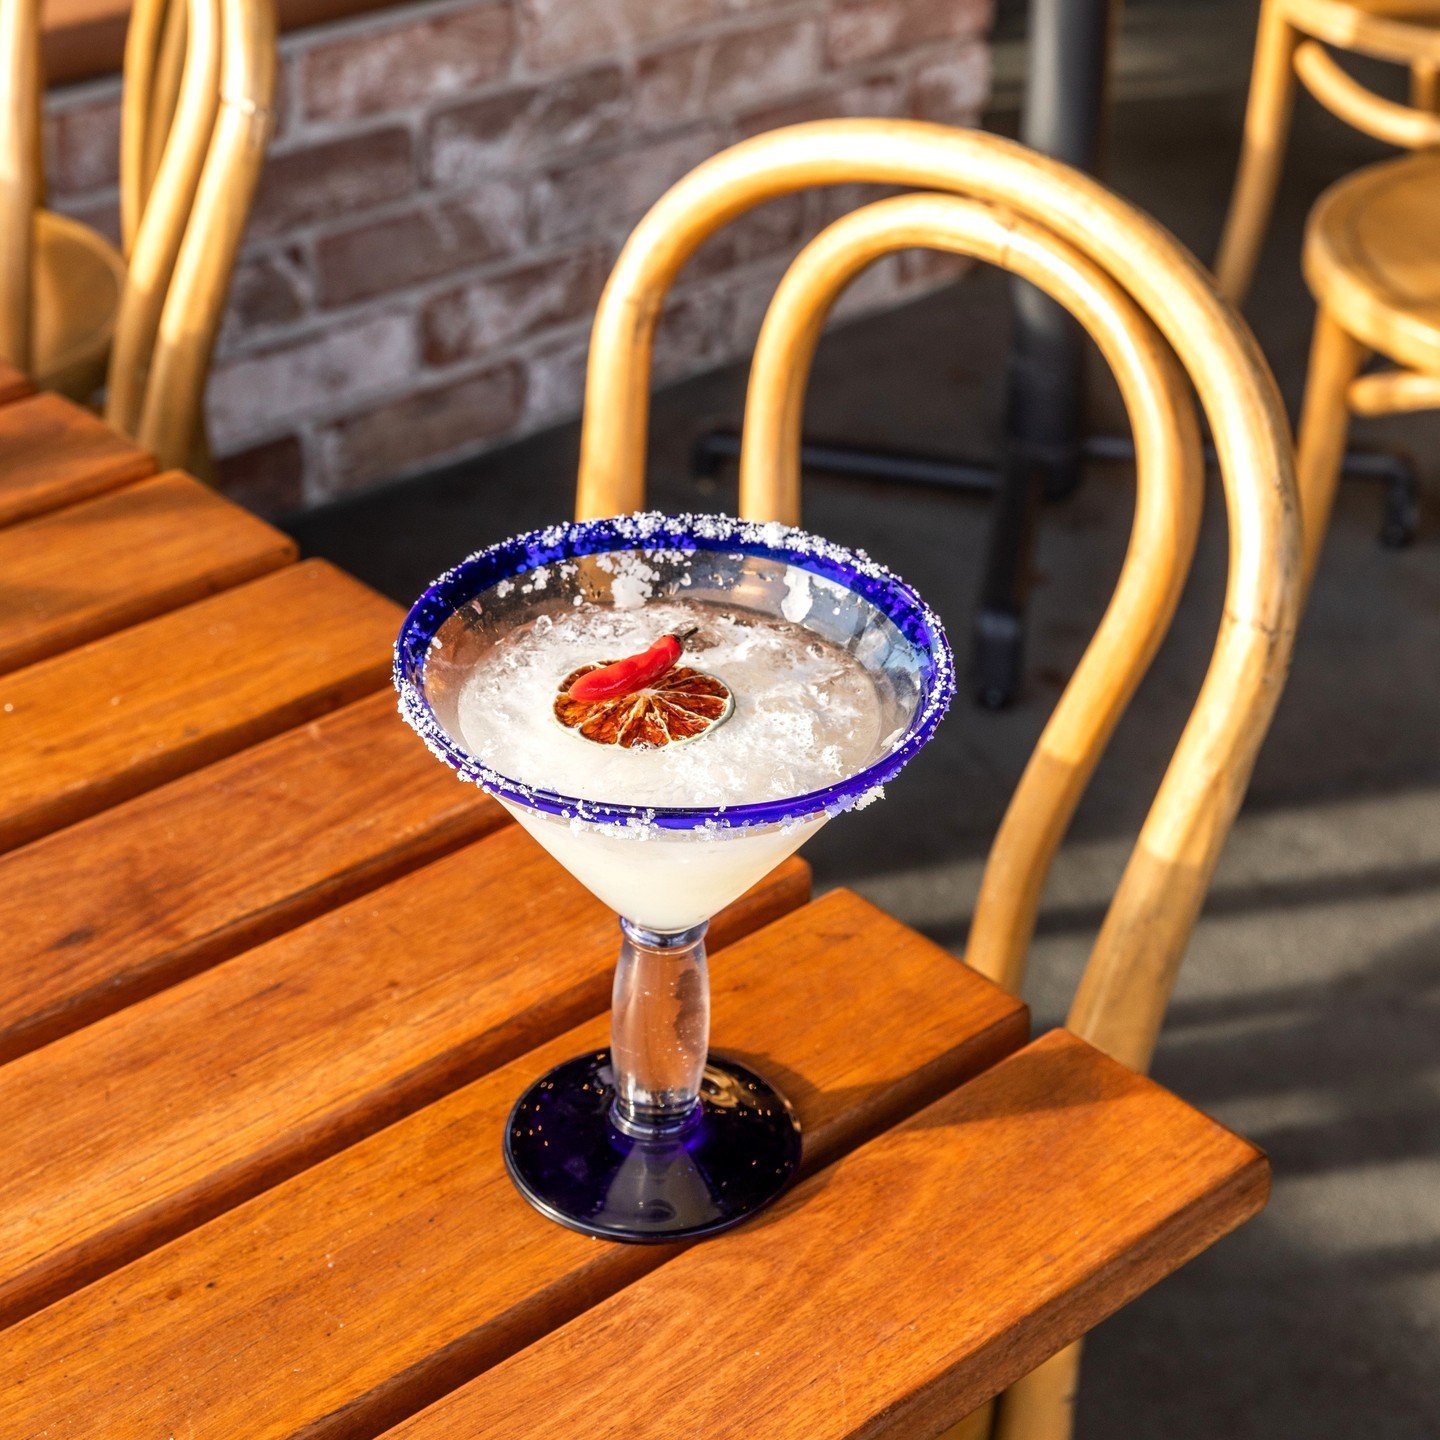 Feeling salty? 🧂 our signature margs are the remedy! 

Choose from our classic Tommy's Marg or Chilli Lime Marg to add a dash of spice to your day 🌶️